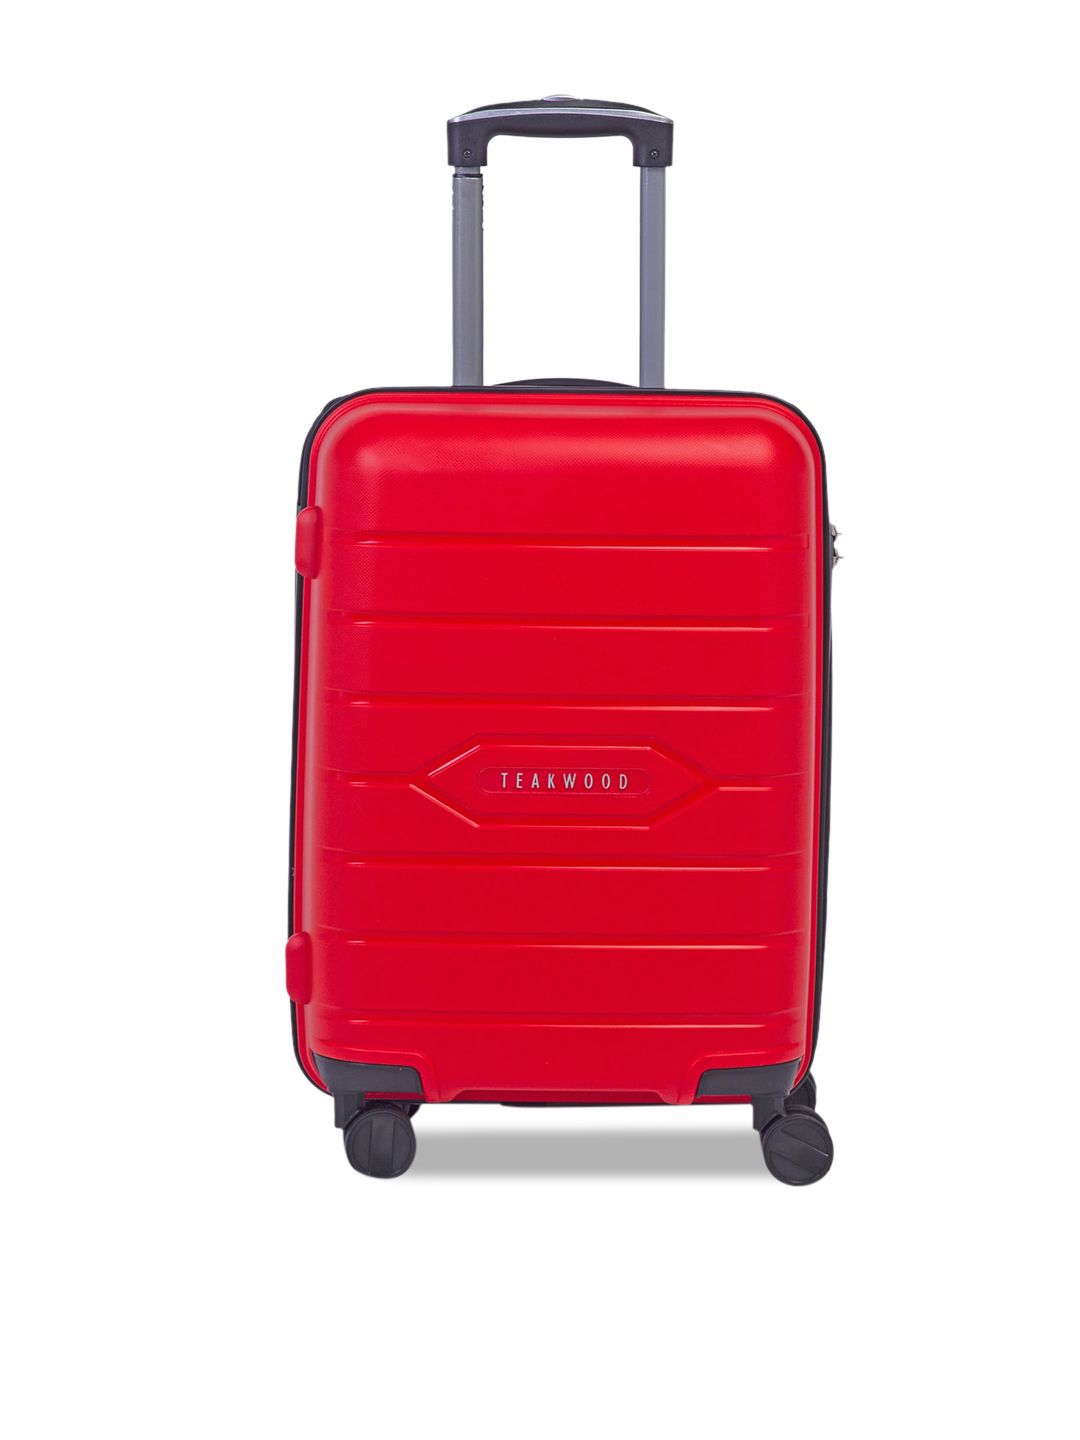 Teakwood Leathers Red Textured Hard-Sided Medium Trolley Suitcase Price in India